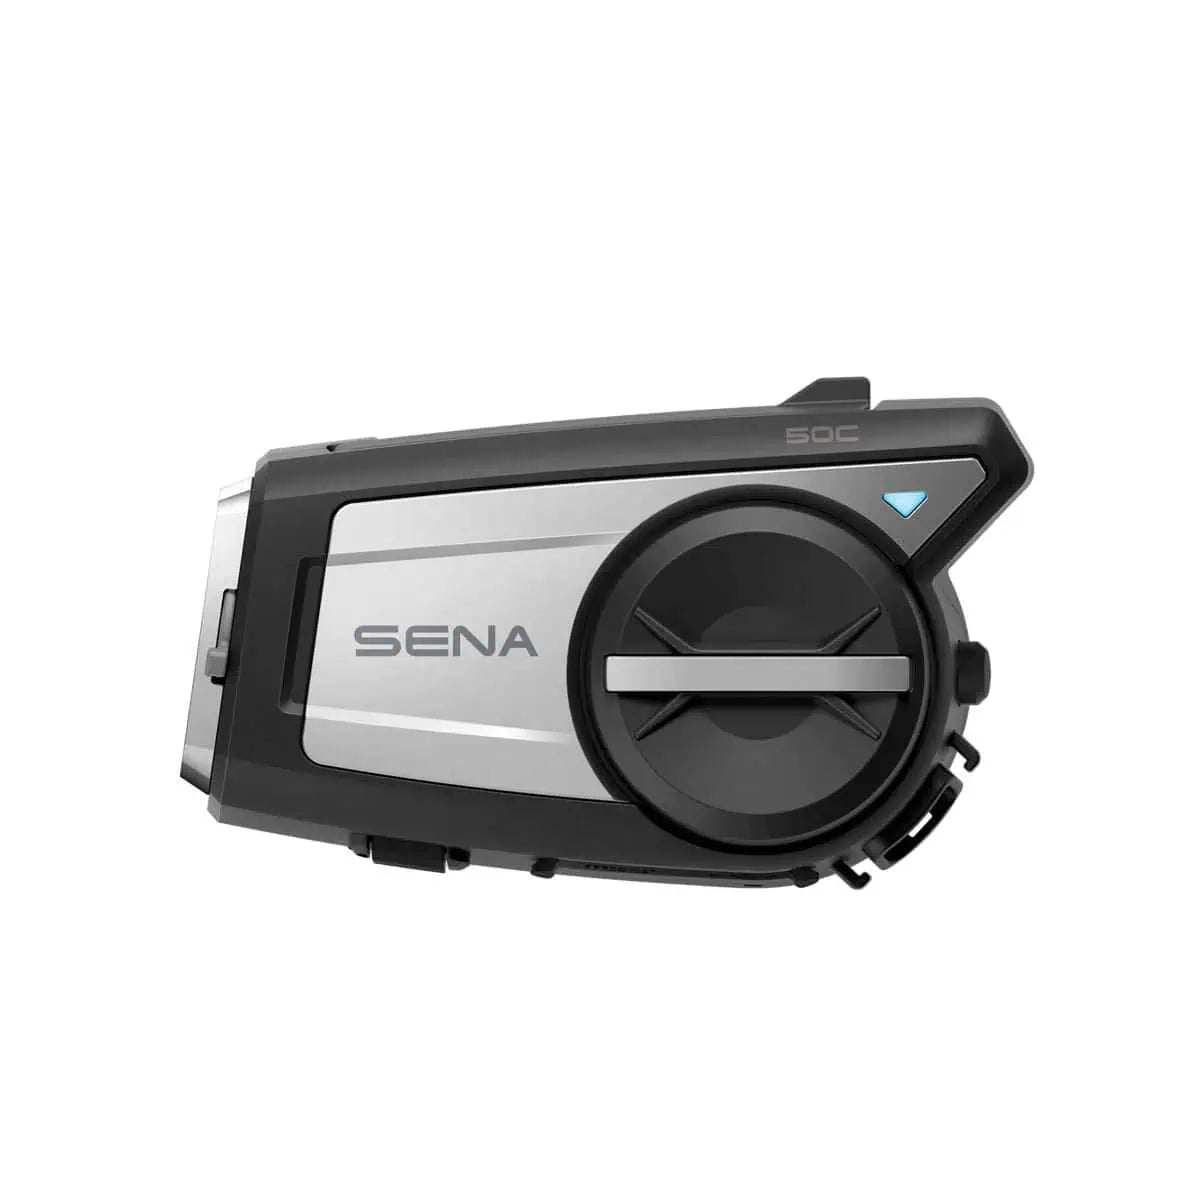 The Sena 50C Comms System &amp; 4k Camera: Capture every crucial moment with this 50C game-changer!